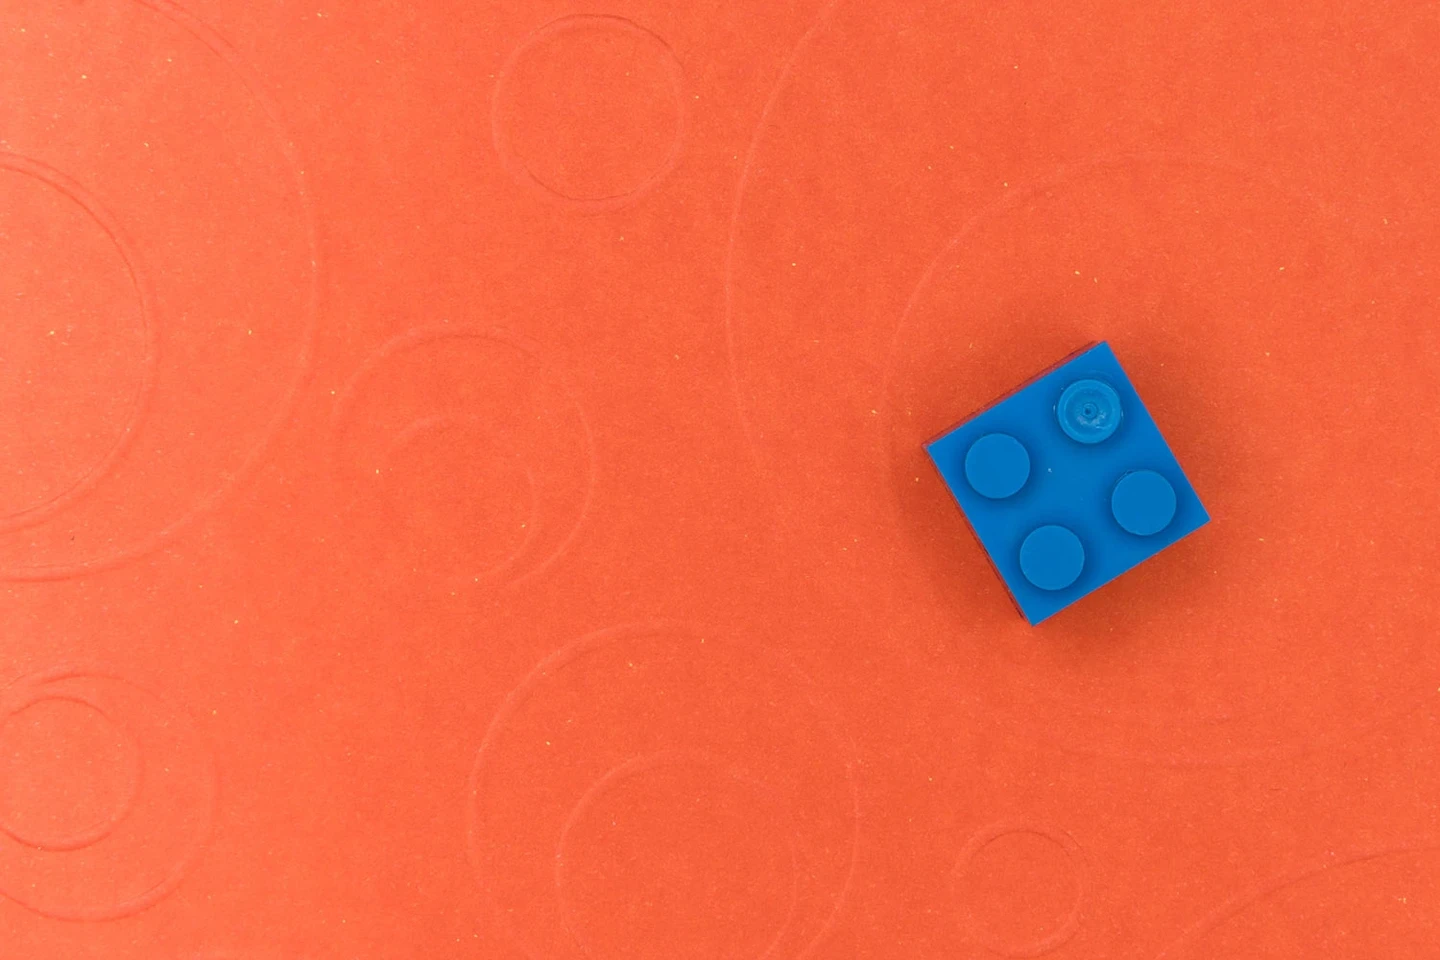 One Lego block on a surface